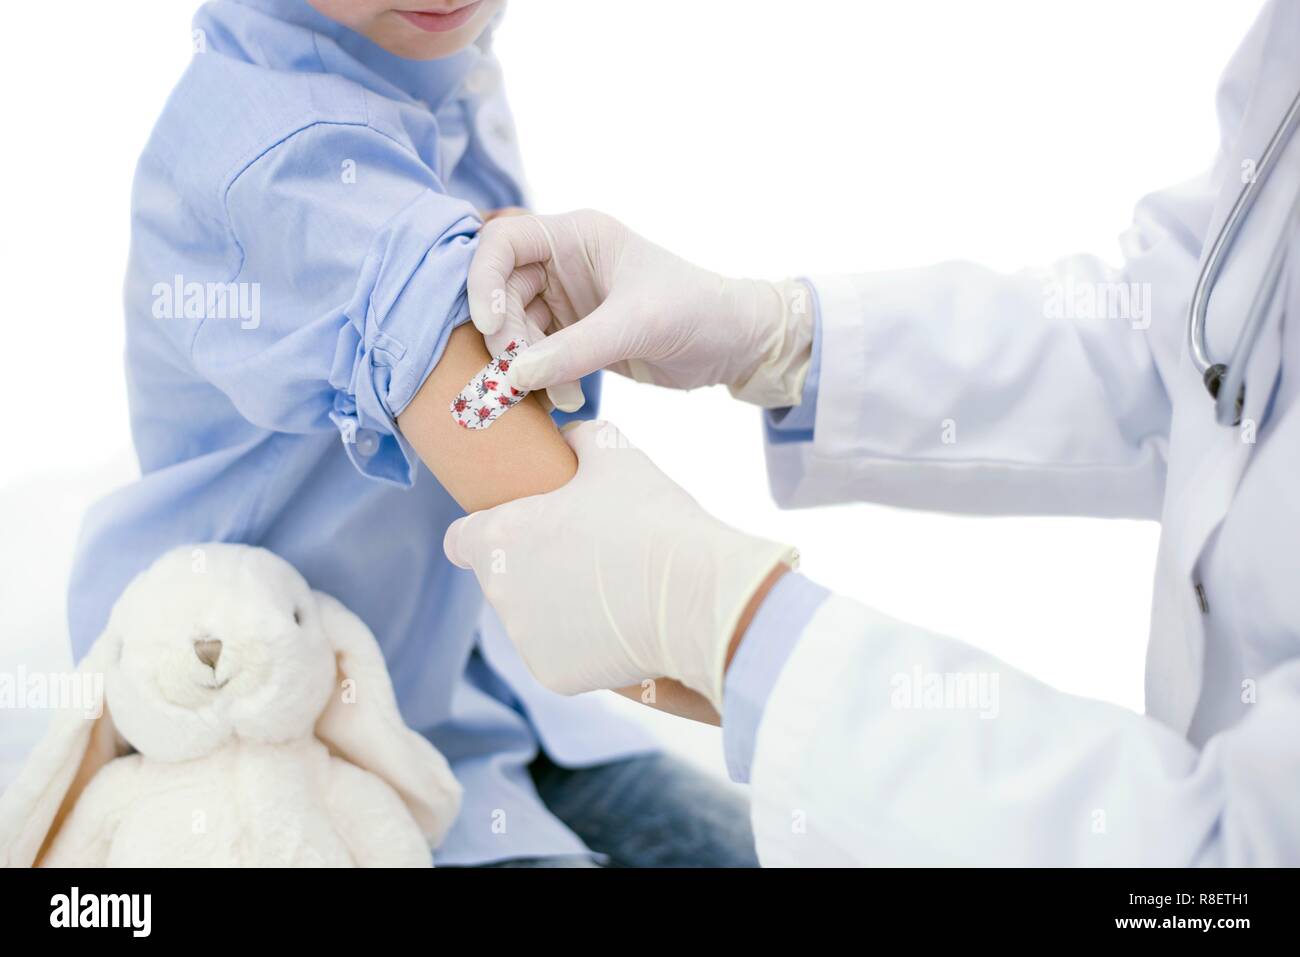 Doctor putting plaster on boy's arm after injection. Stock Photo